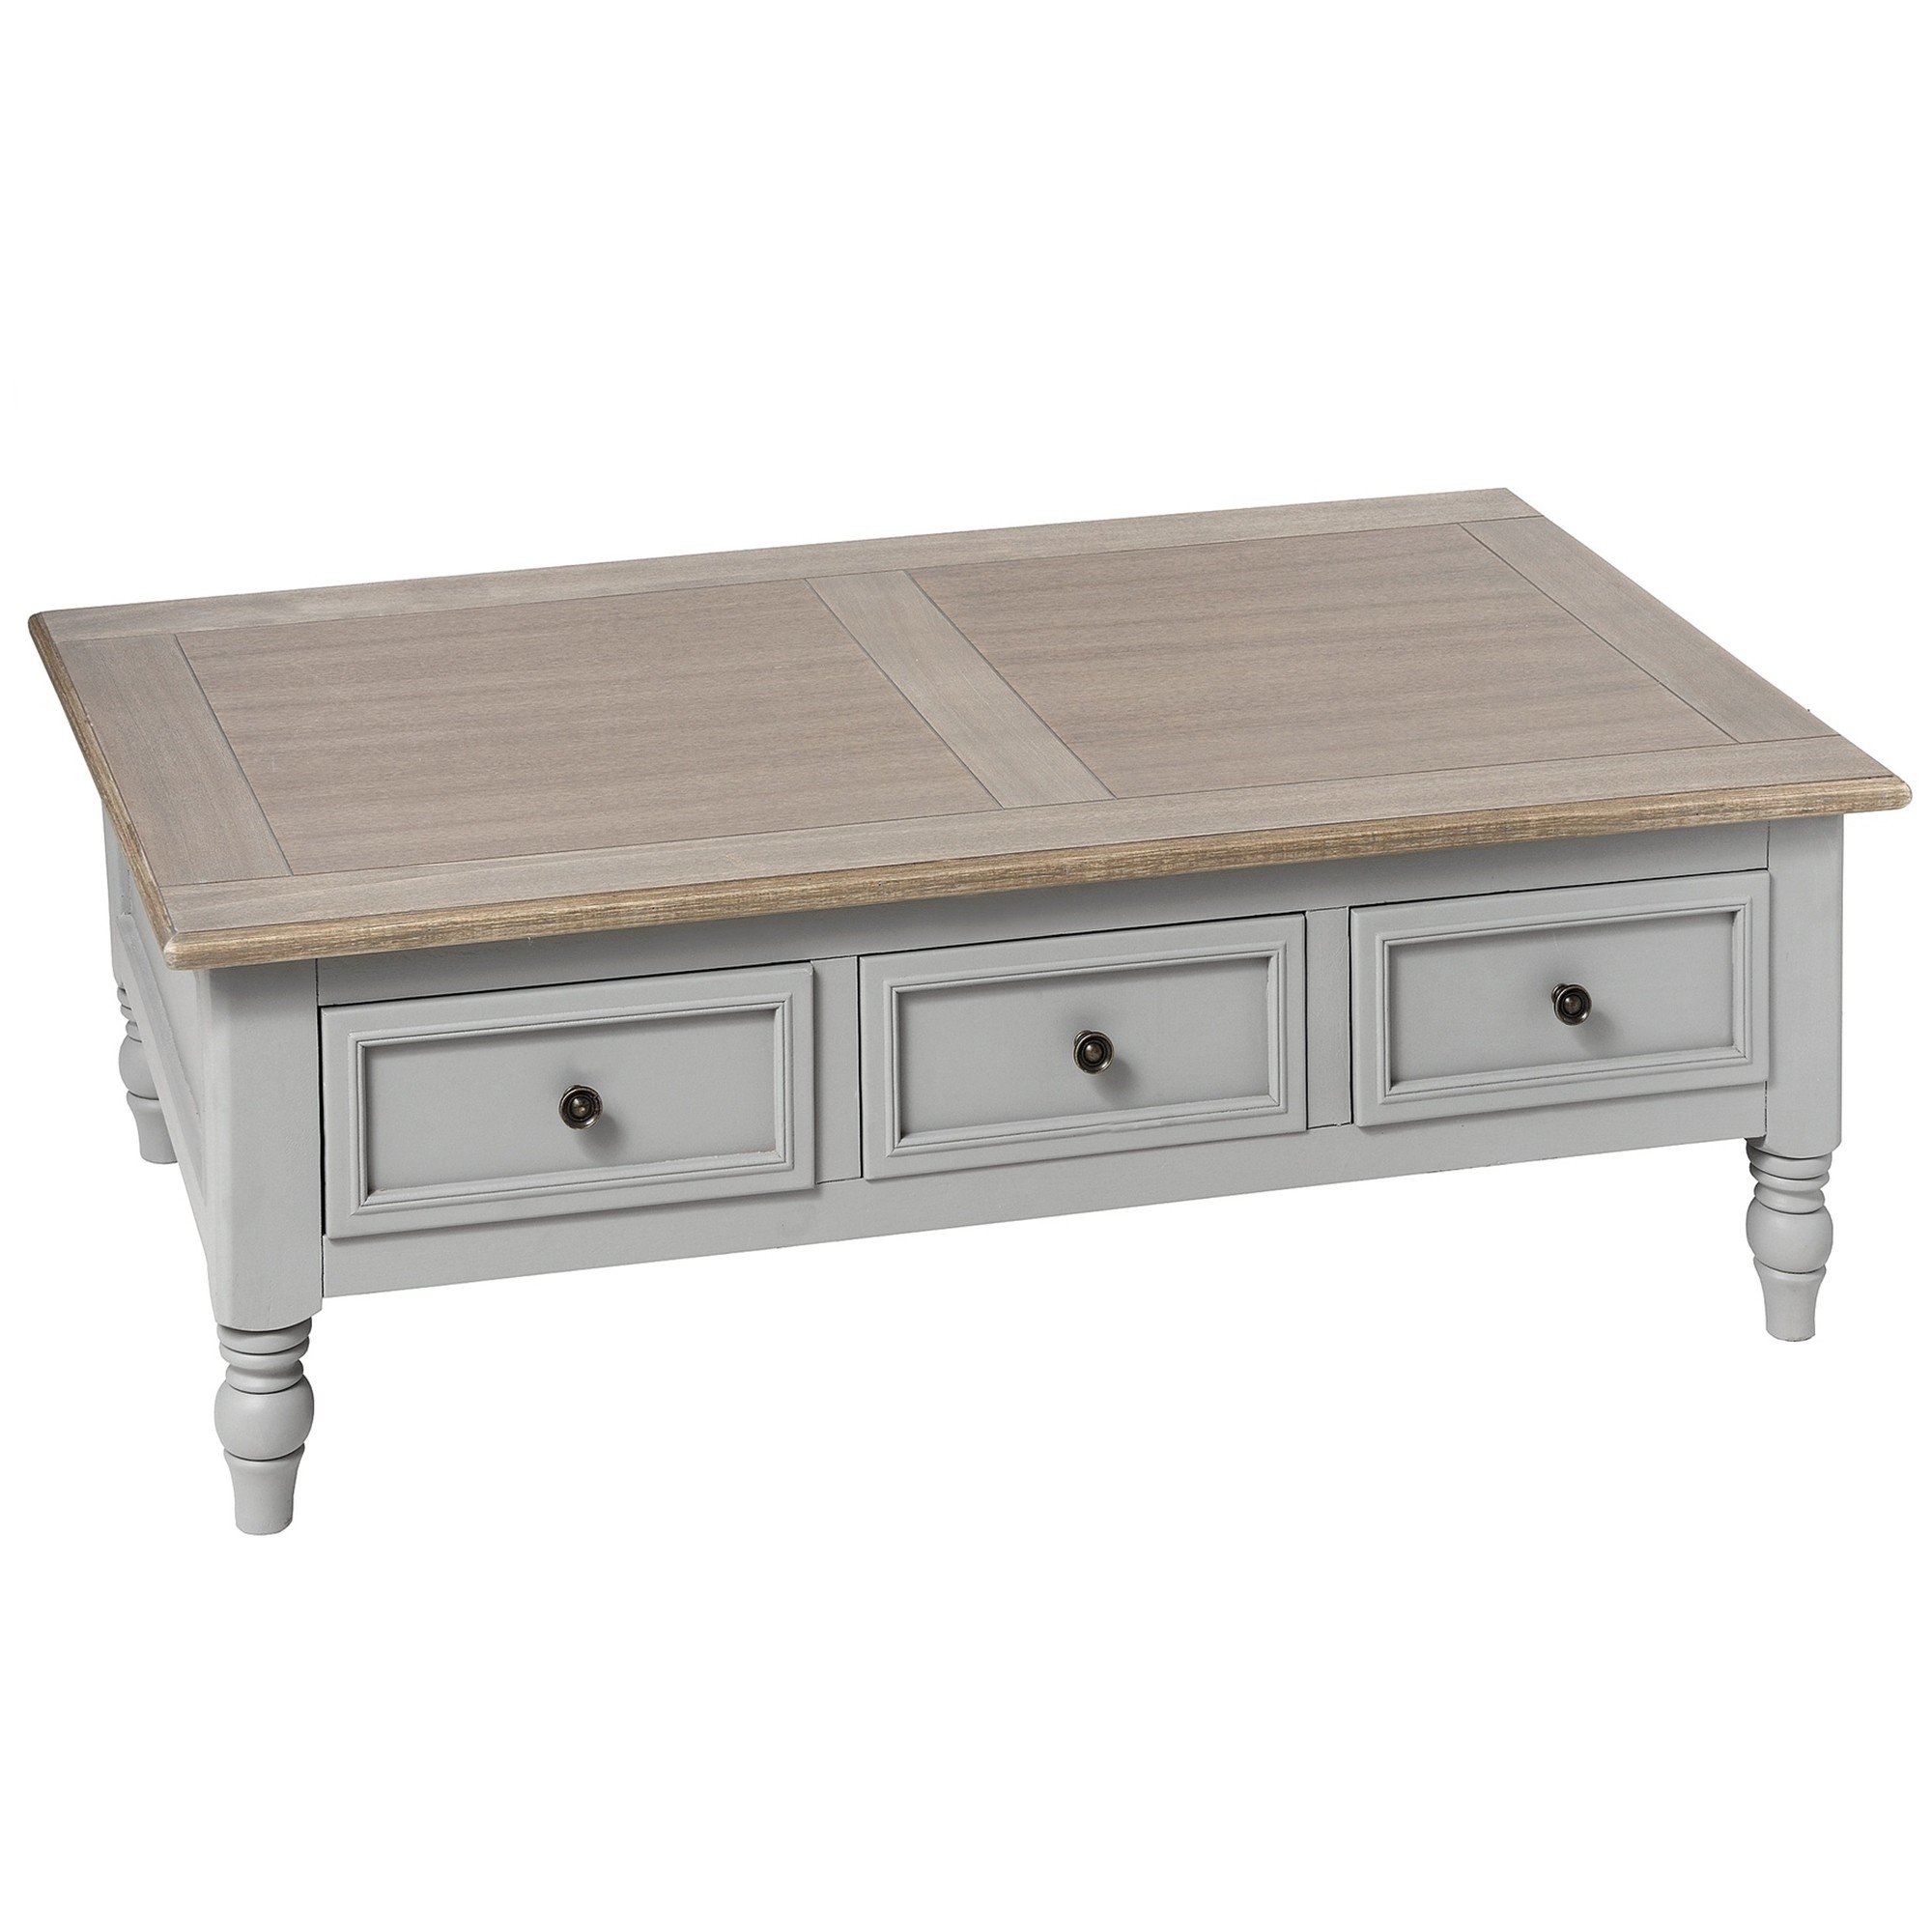 Churchill shabby chic coffee table available now